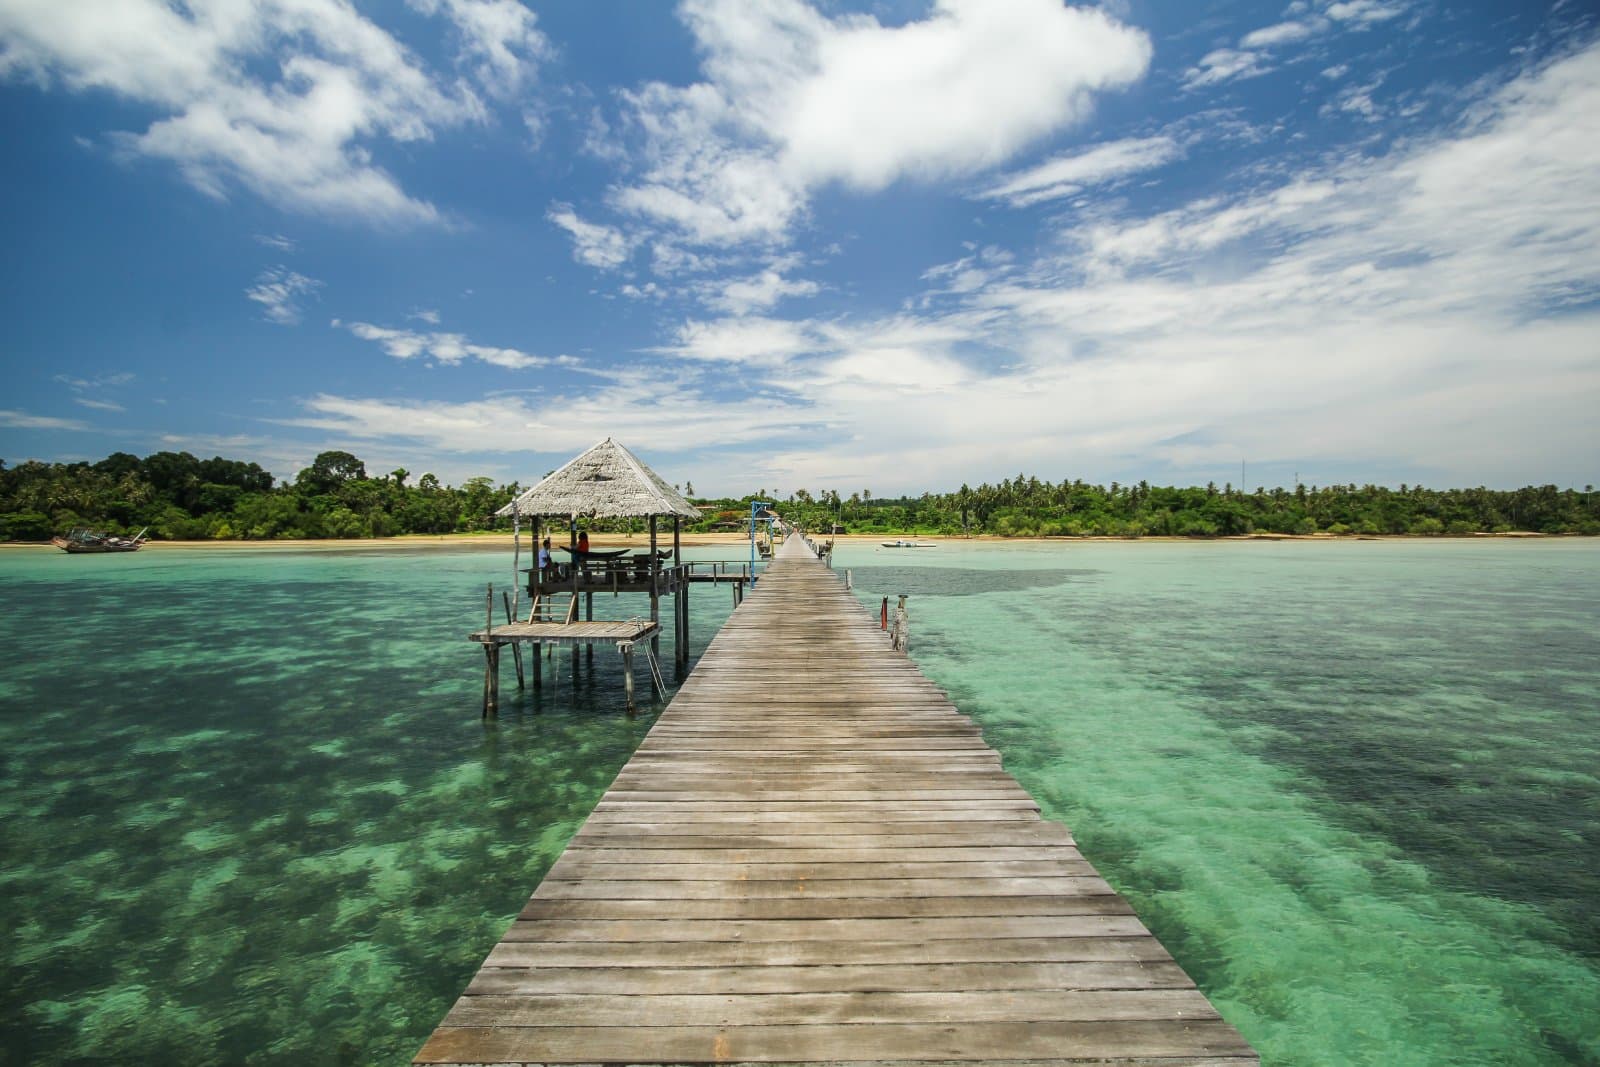 <p class="wp-caption-text">Image Credit: Shutterstock / SATHIANPONG PHOOKIT</p>  <p><span>Koh Mak, a tranquil island located in the eastern Gulf of Thailand, stands as a model for sustainable tourism within the country. Owned by a single family committed to preserving the island’s natural beauty, Koh Mak has managed to maintain a low-key atmosphere despite its stunning beaches and clear waters. The island is dotted with rubber plantations and coconut groves, with a network of roads perfect for cycling enthusiasts to explore. Its coral reefs are part of a marine protected area, offering snorkeling and diving experiences that are both breathtaking and respectful of the marine environment. Accommodations on Koh Mak range from eco-friendly bungalows to luxury villas, all designed to minimize their environmental impact. The island’s commitment to green initiatives, including waste management and renewable energy, sets a precedent for responsible travel in Thailand. Koh Mak is not just a destination but a retreat into a sustainable way of life, where the beauty of nature is preserved for future generations to enjoy.</span></p>